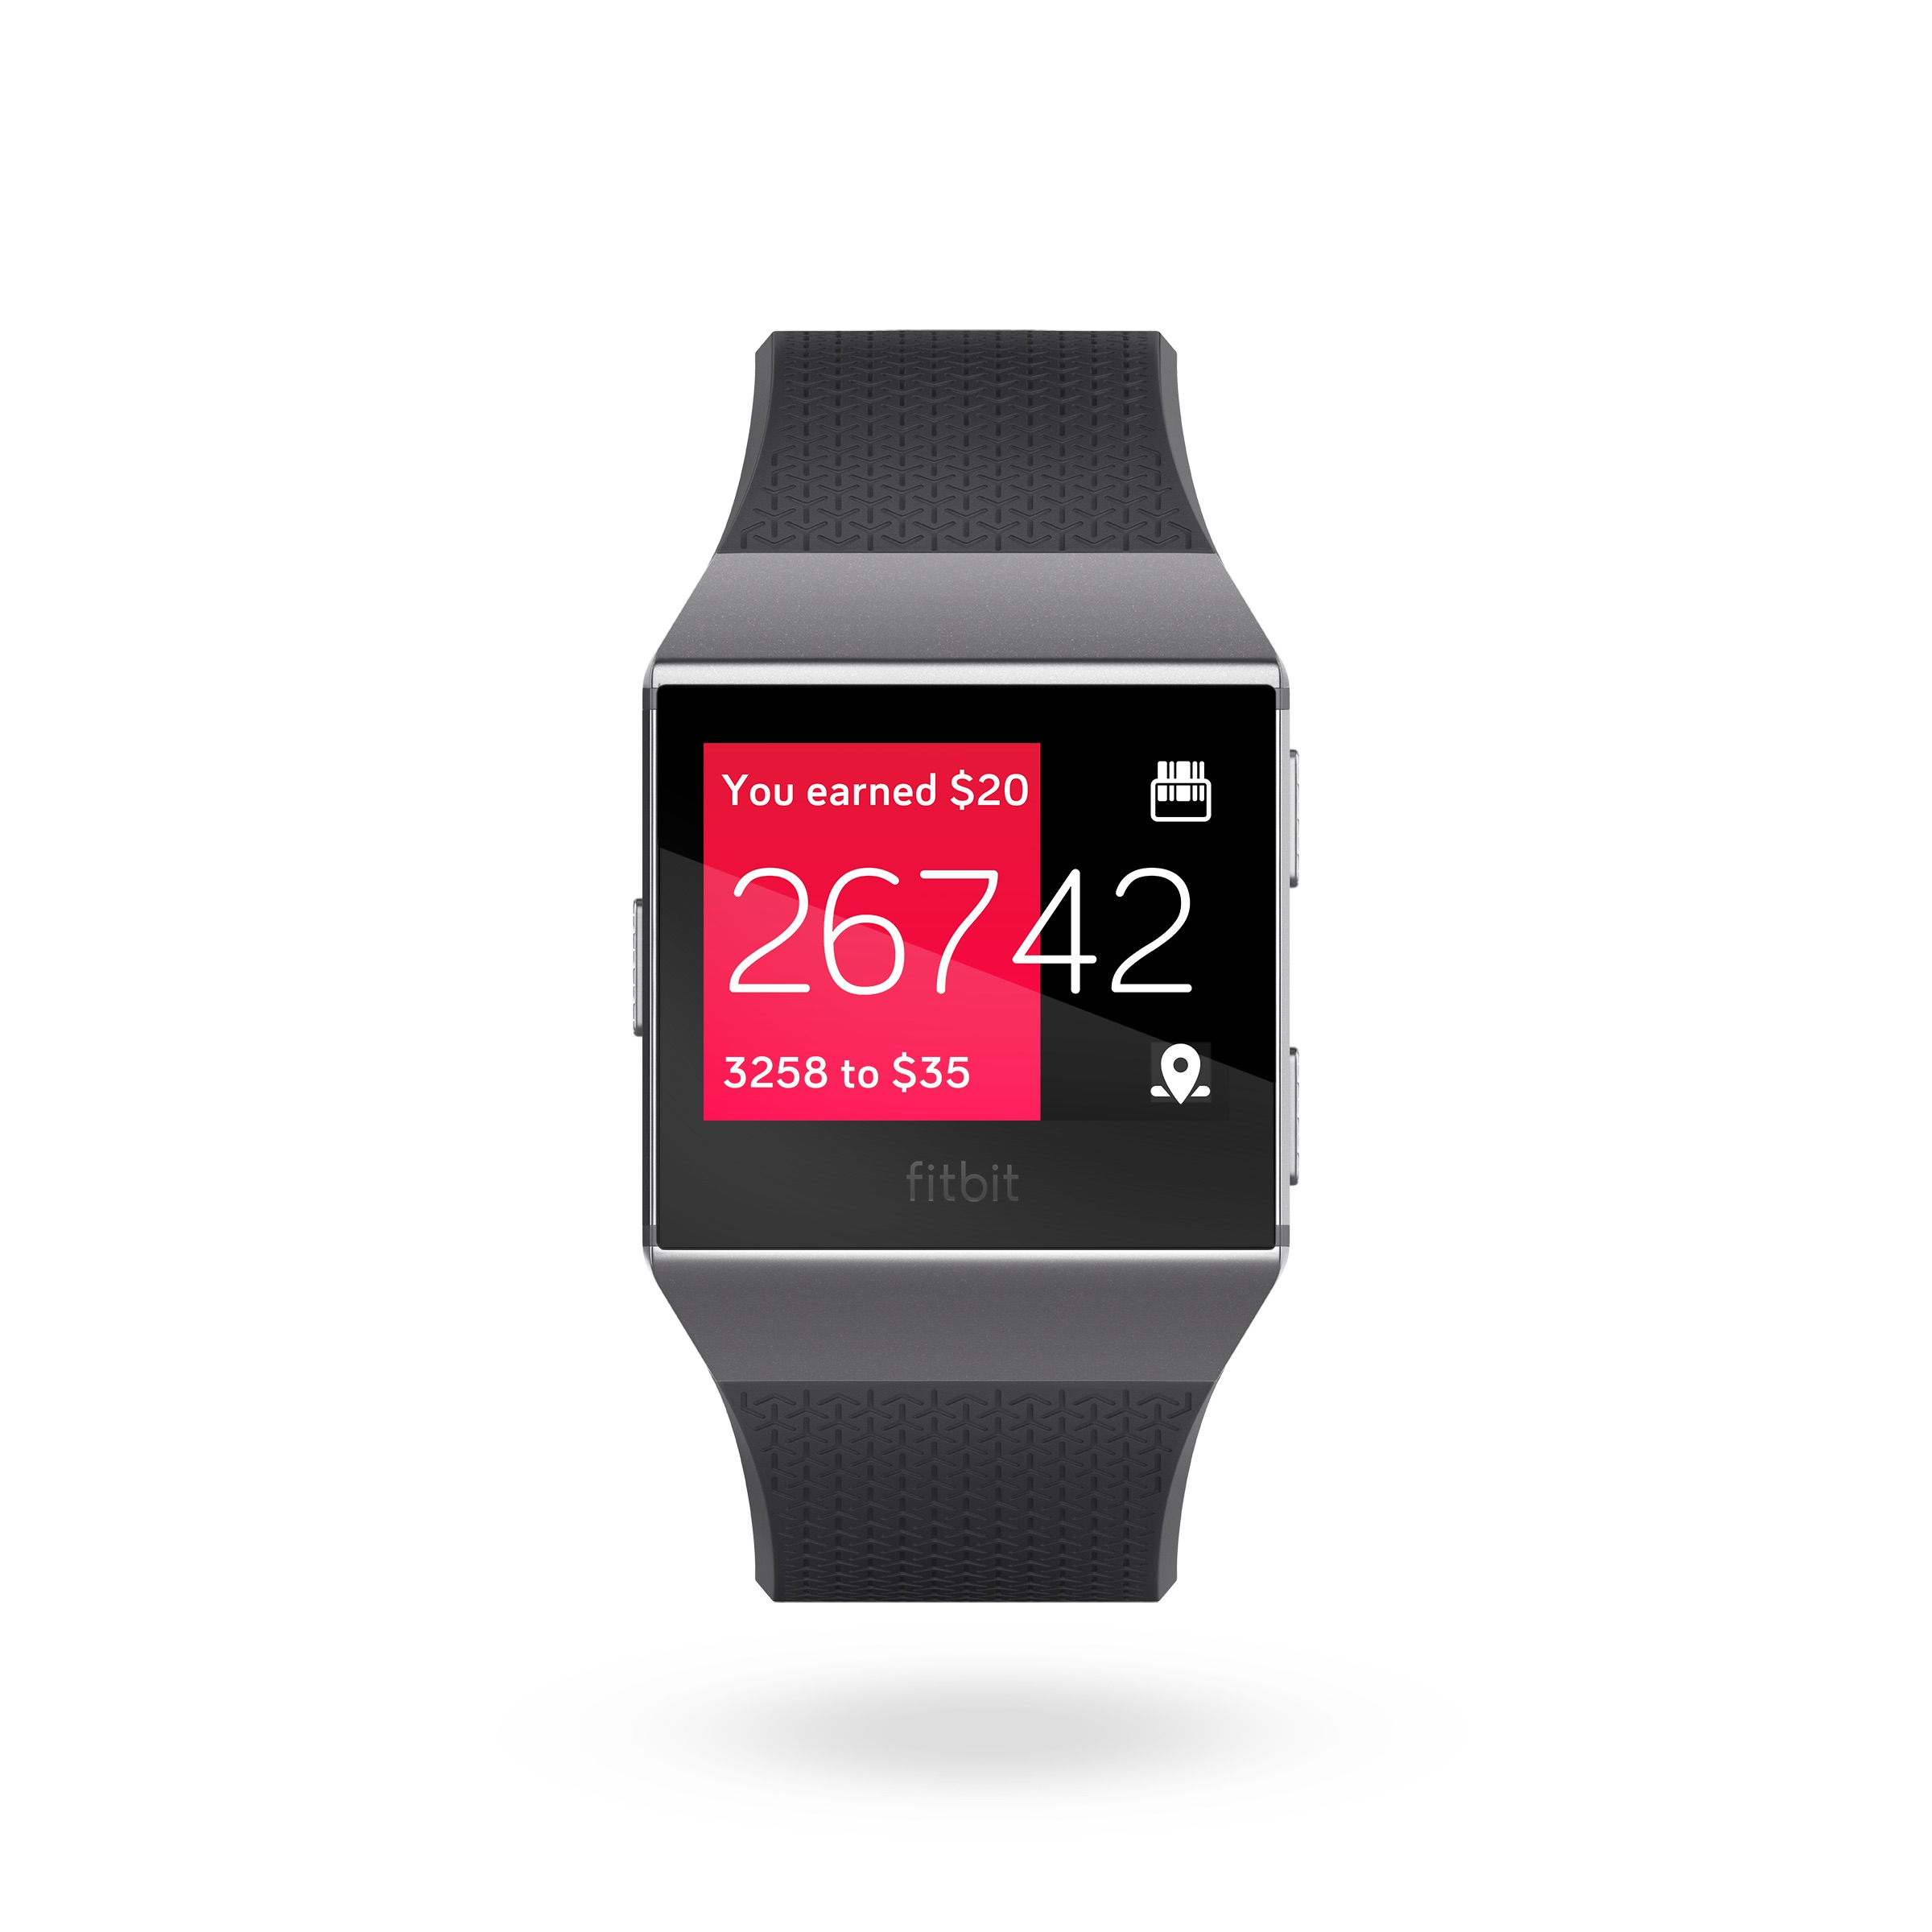 apps-for-fitbit-walgreens - Fitbit Blog